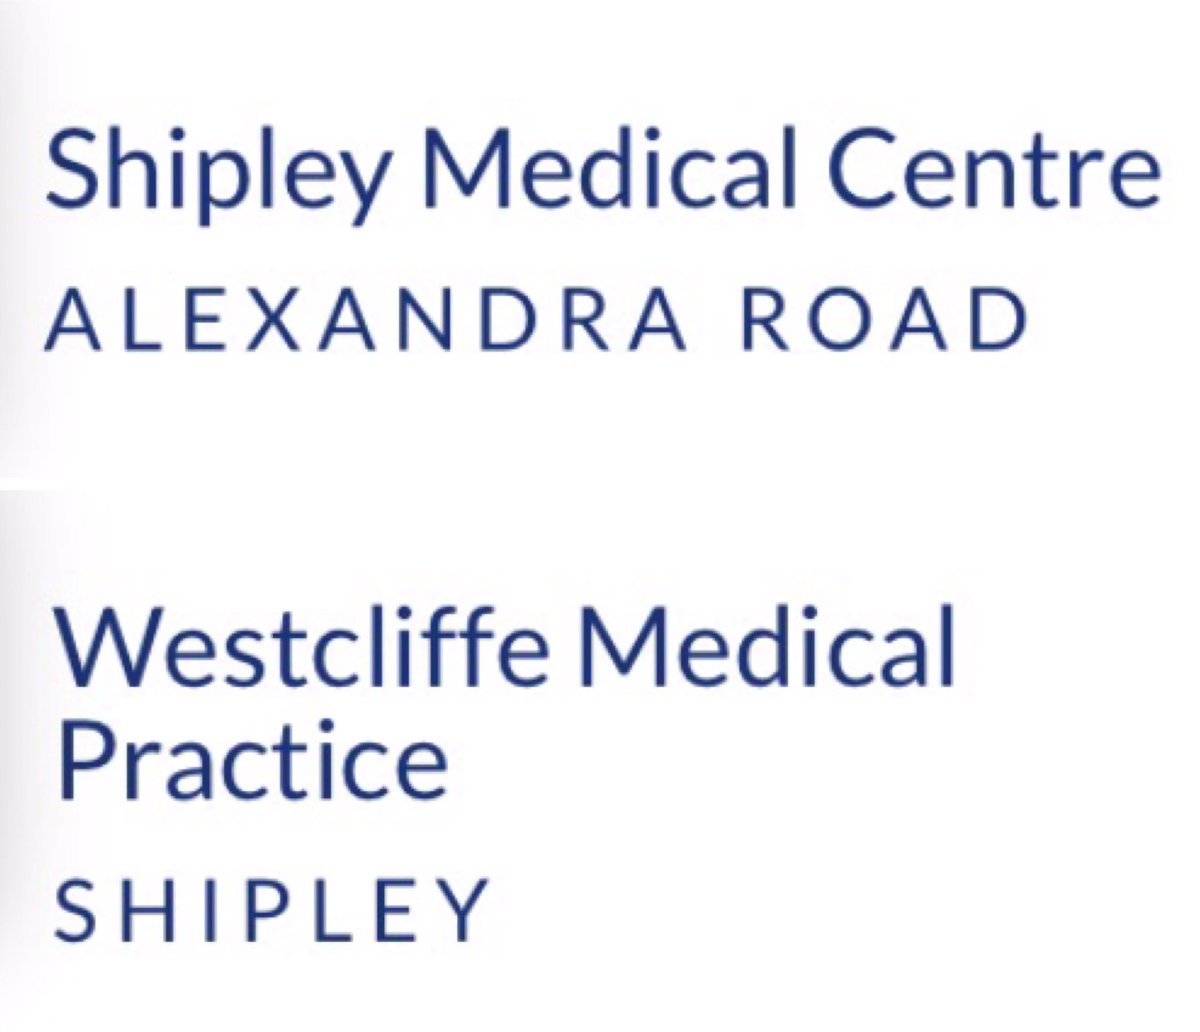 Shipley Medical Practice & Westcliffe Medical Practice are formally joining (if you’re a patient of either practice you should have received a letter) There’s a patient meeting on Monday 18th March 7pm at Shipley Library if you would like to know more or have any questions.